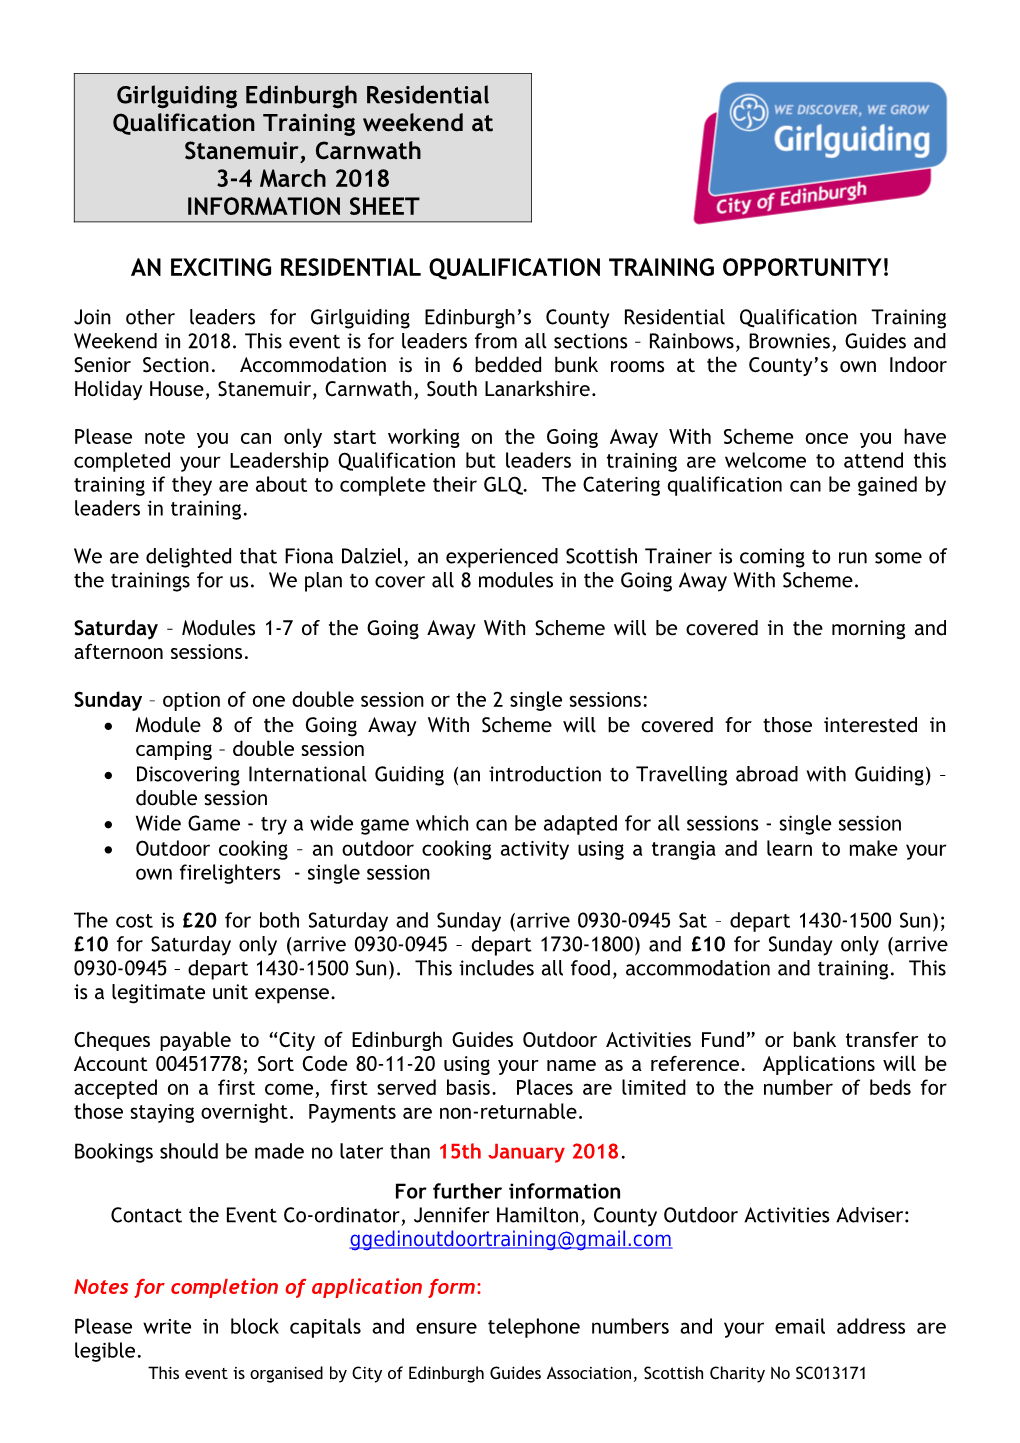 An Exciting Residential Qualification Training Opportunity!